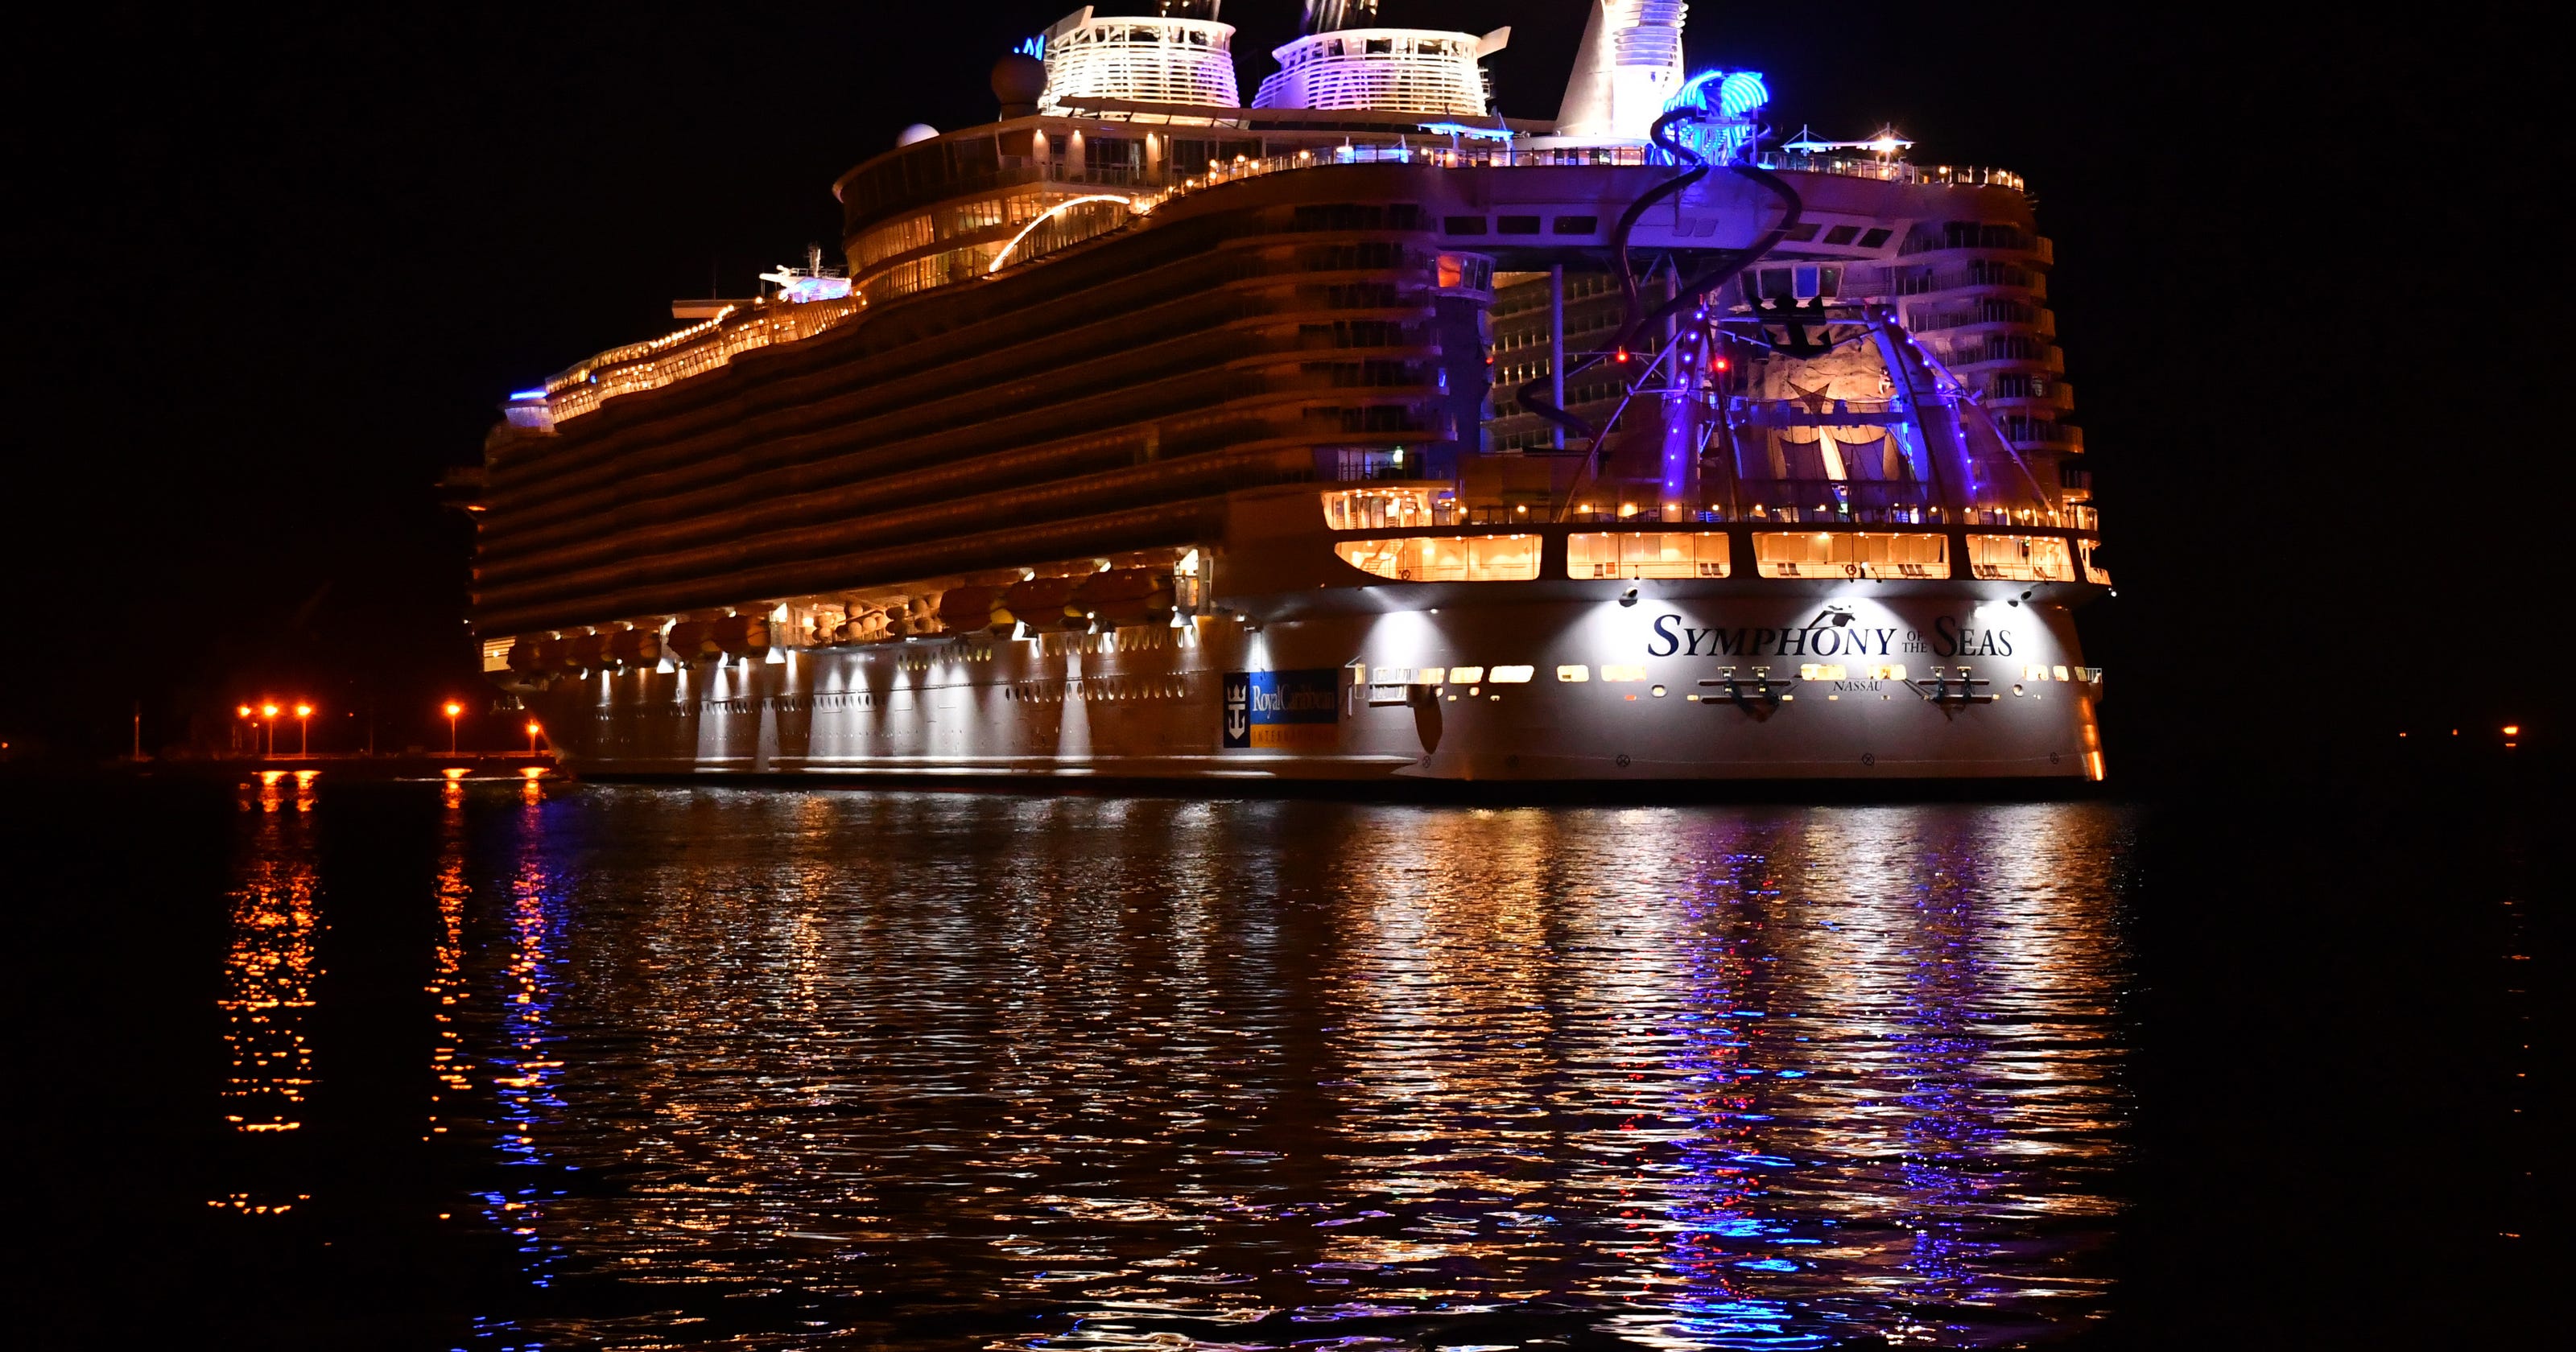 list of cruise ships in port